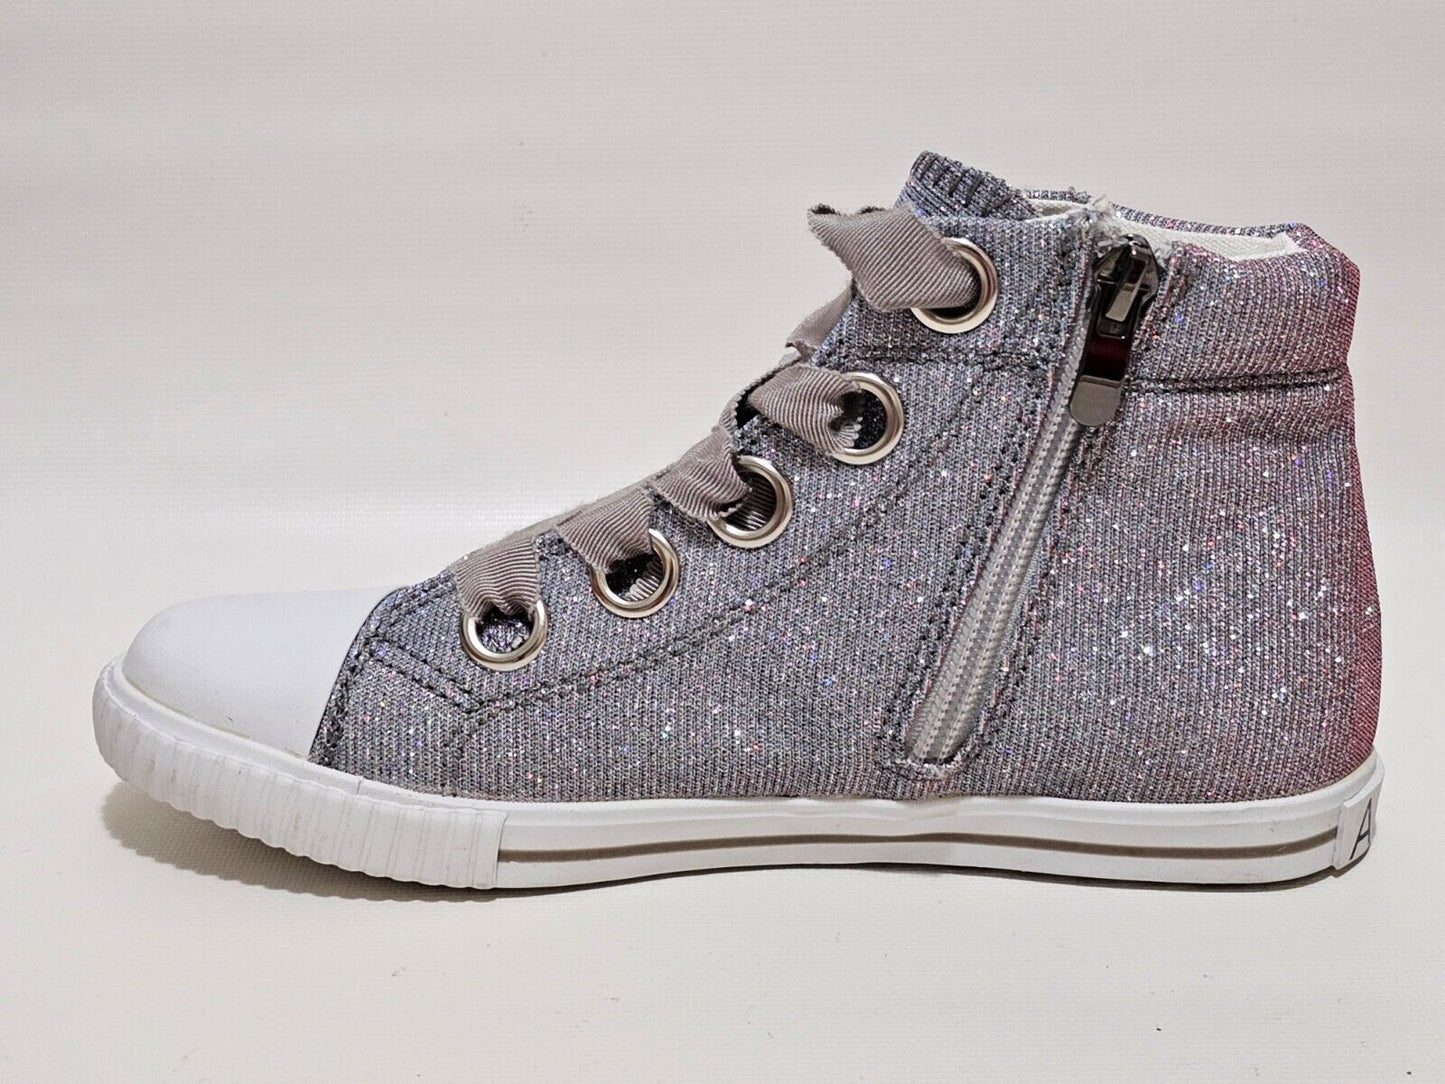 Shimmer Metallic Silver High Top Sneakers Girls Size 2